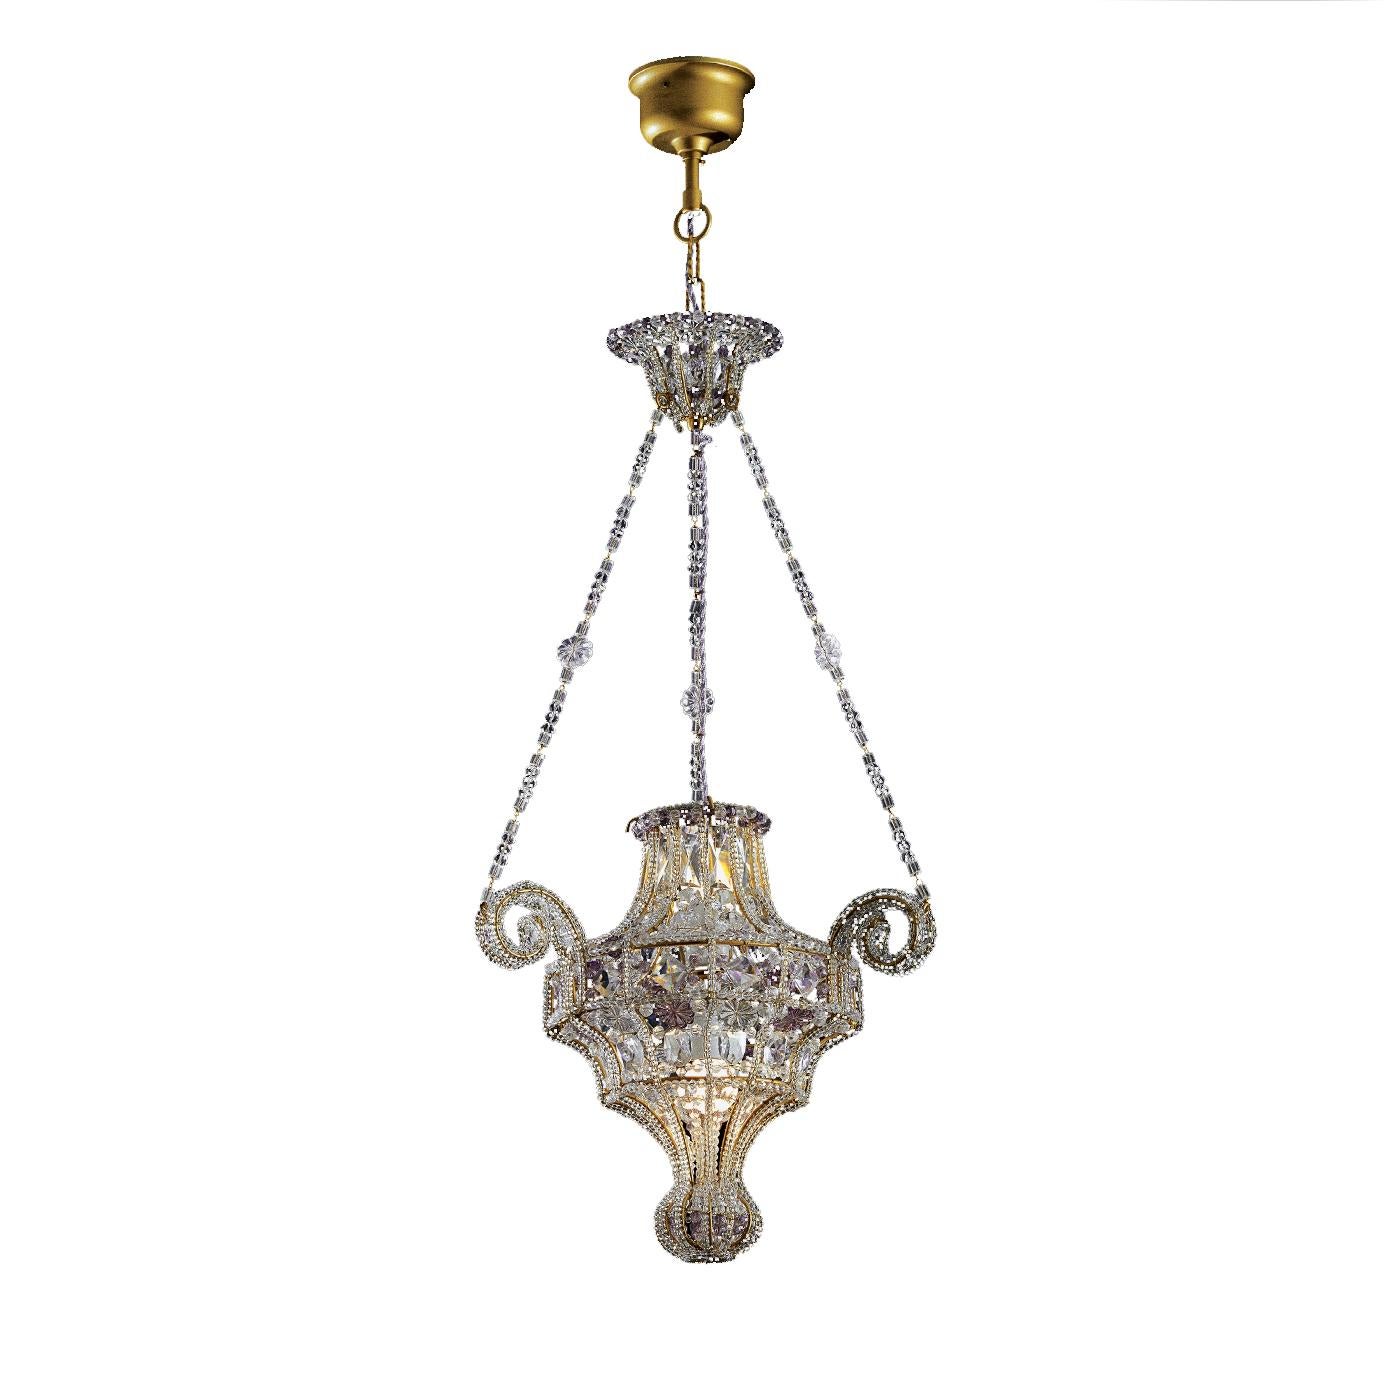 A masterful example of fine craftsmanship and elegant design, the chandelier will make a sophisticated statement in a classically furnished entryway or dining room in a traditional environment. Its structure was crafted of forged iron and adorned